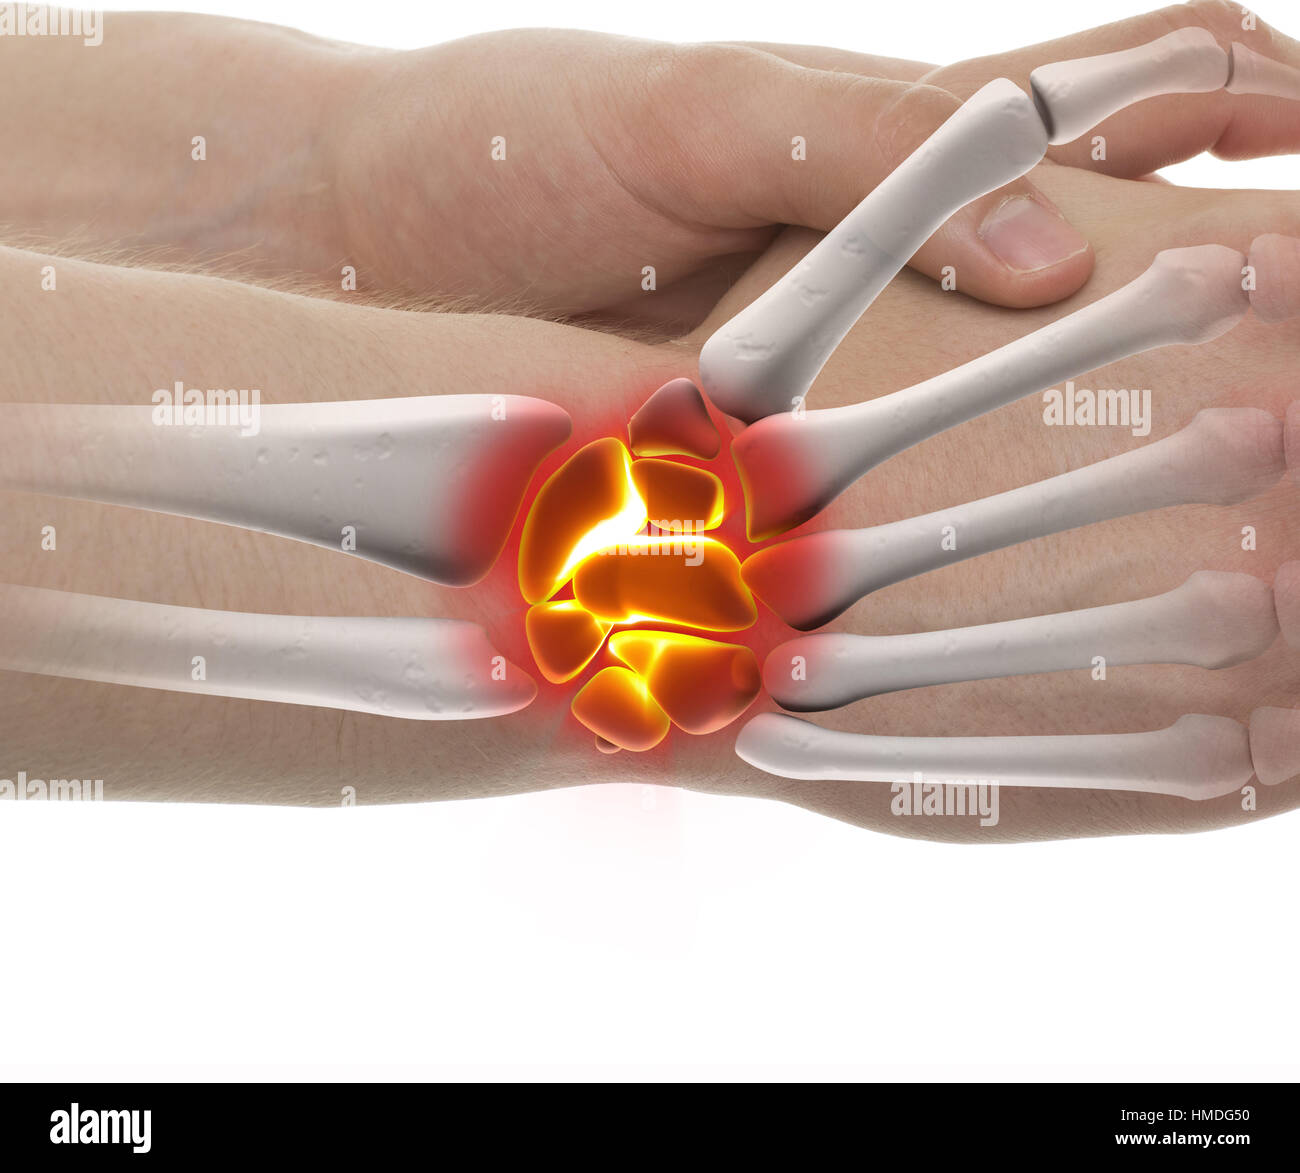 Wrist Fracture - Studio shot with 3D illustration isolated on white Stock Photo